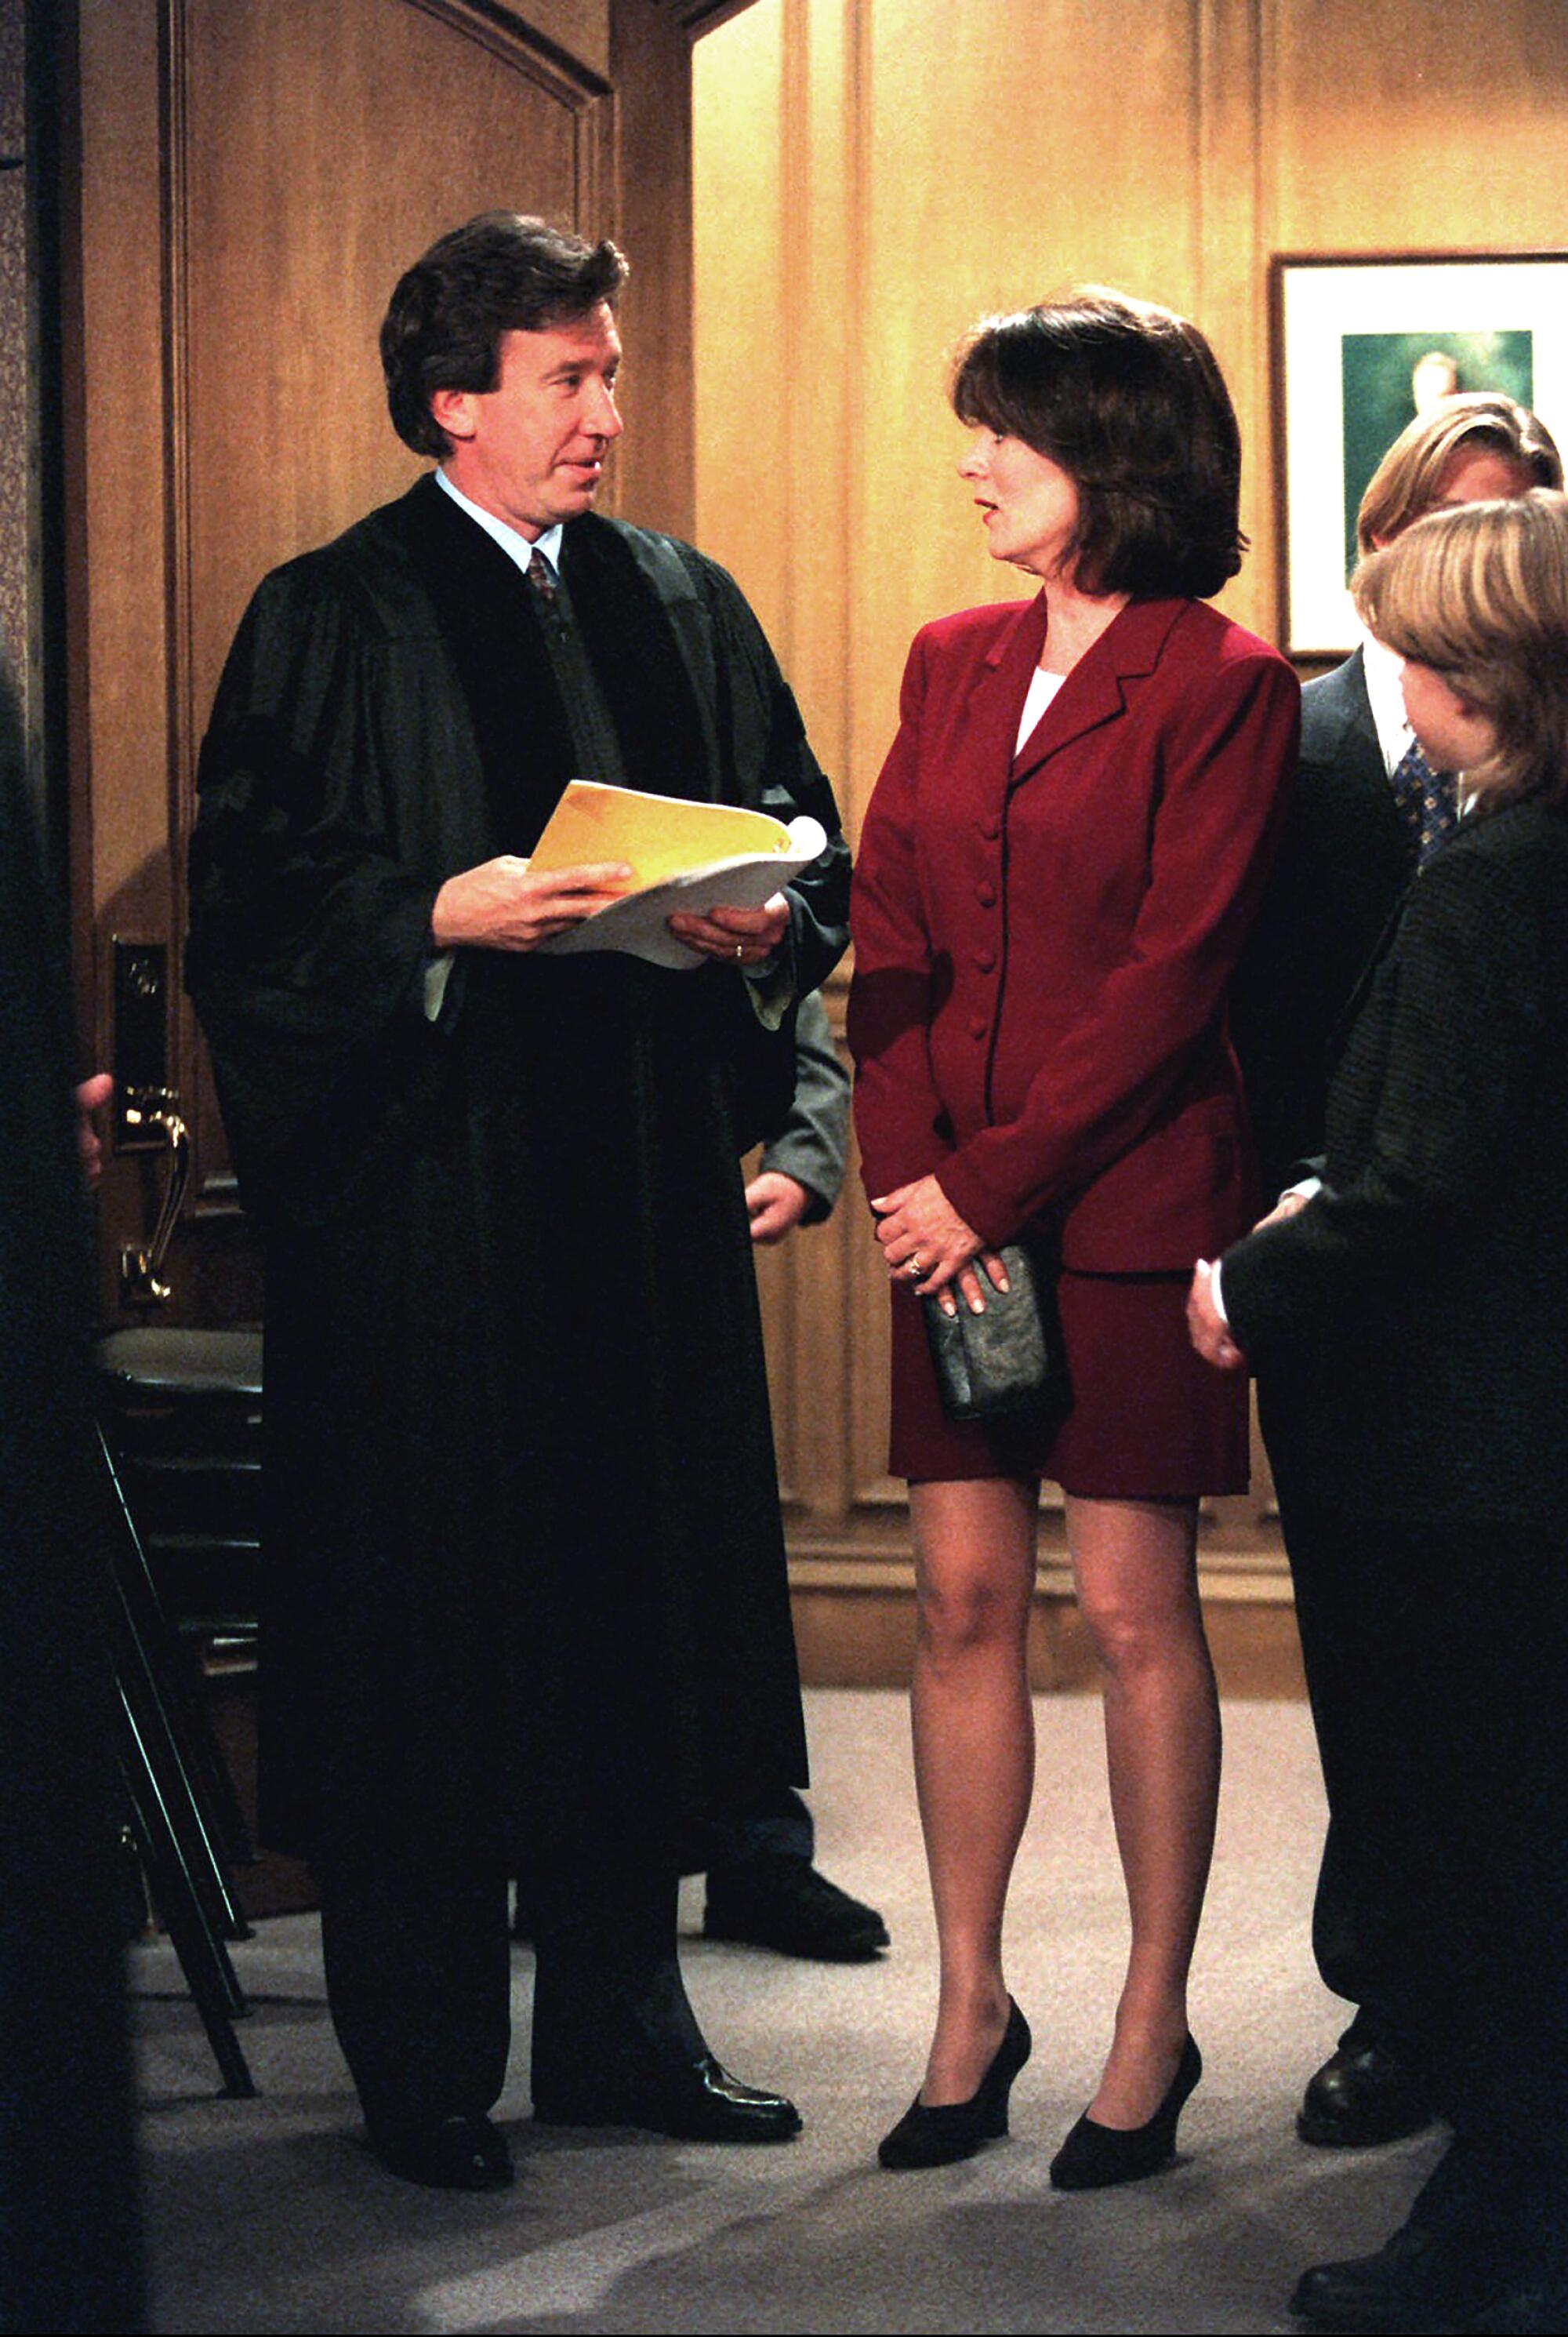 A man in a black robe stands next to a woman in red suit.